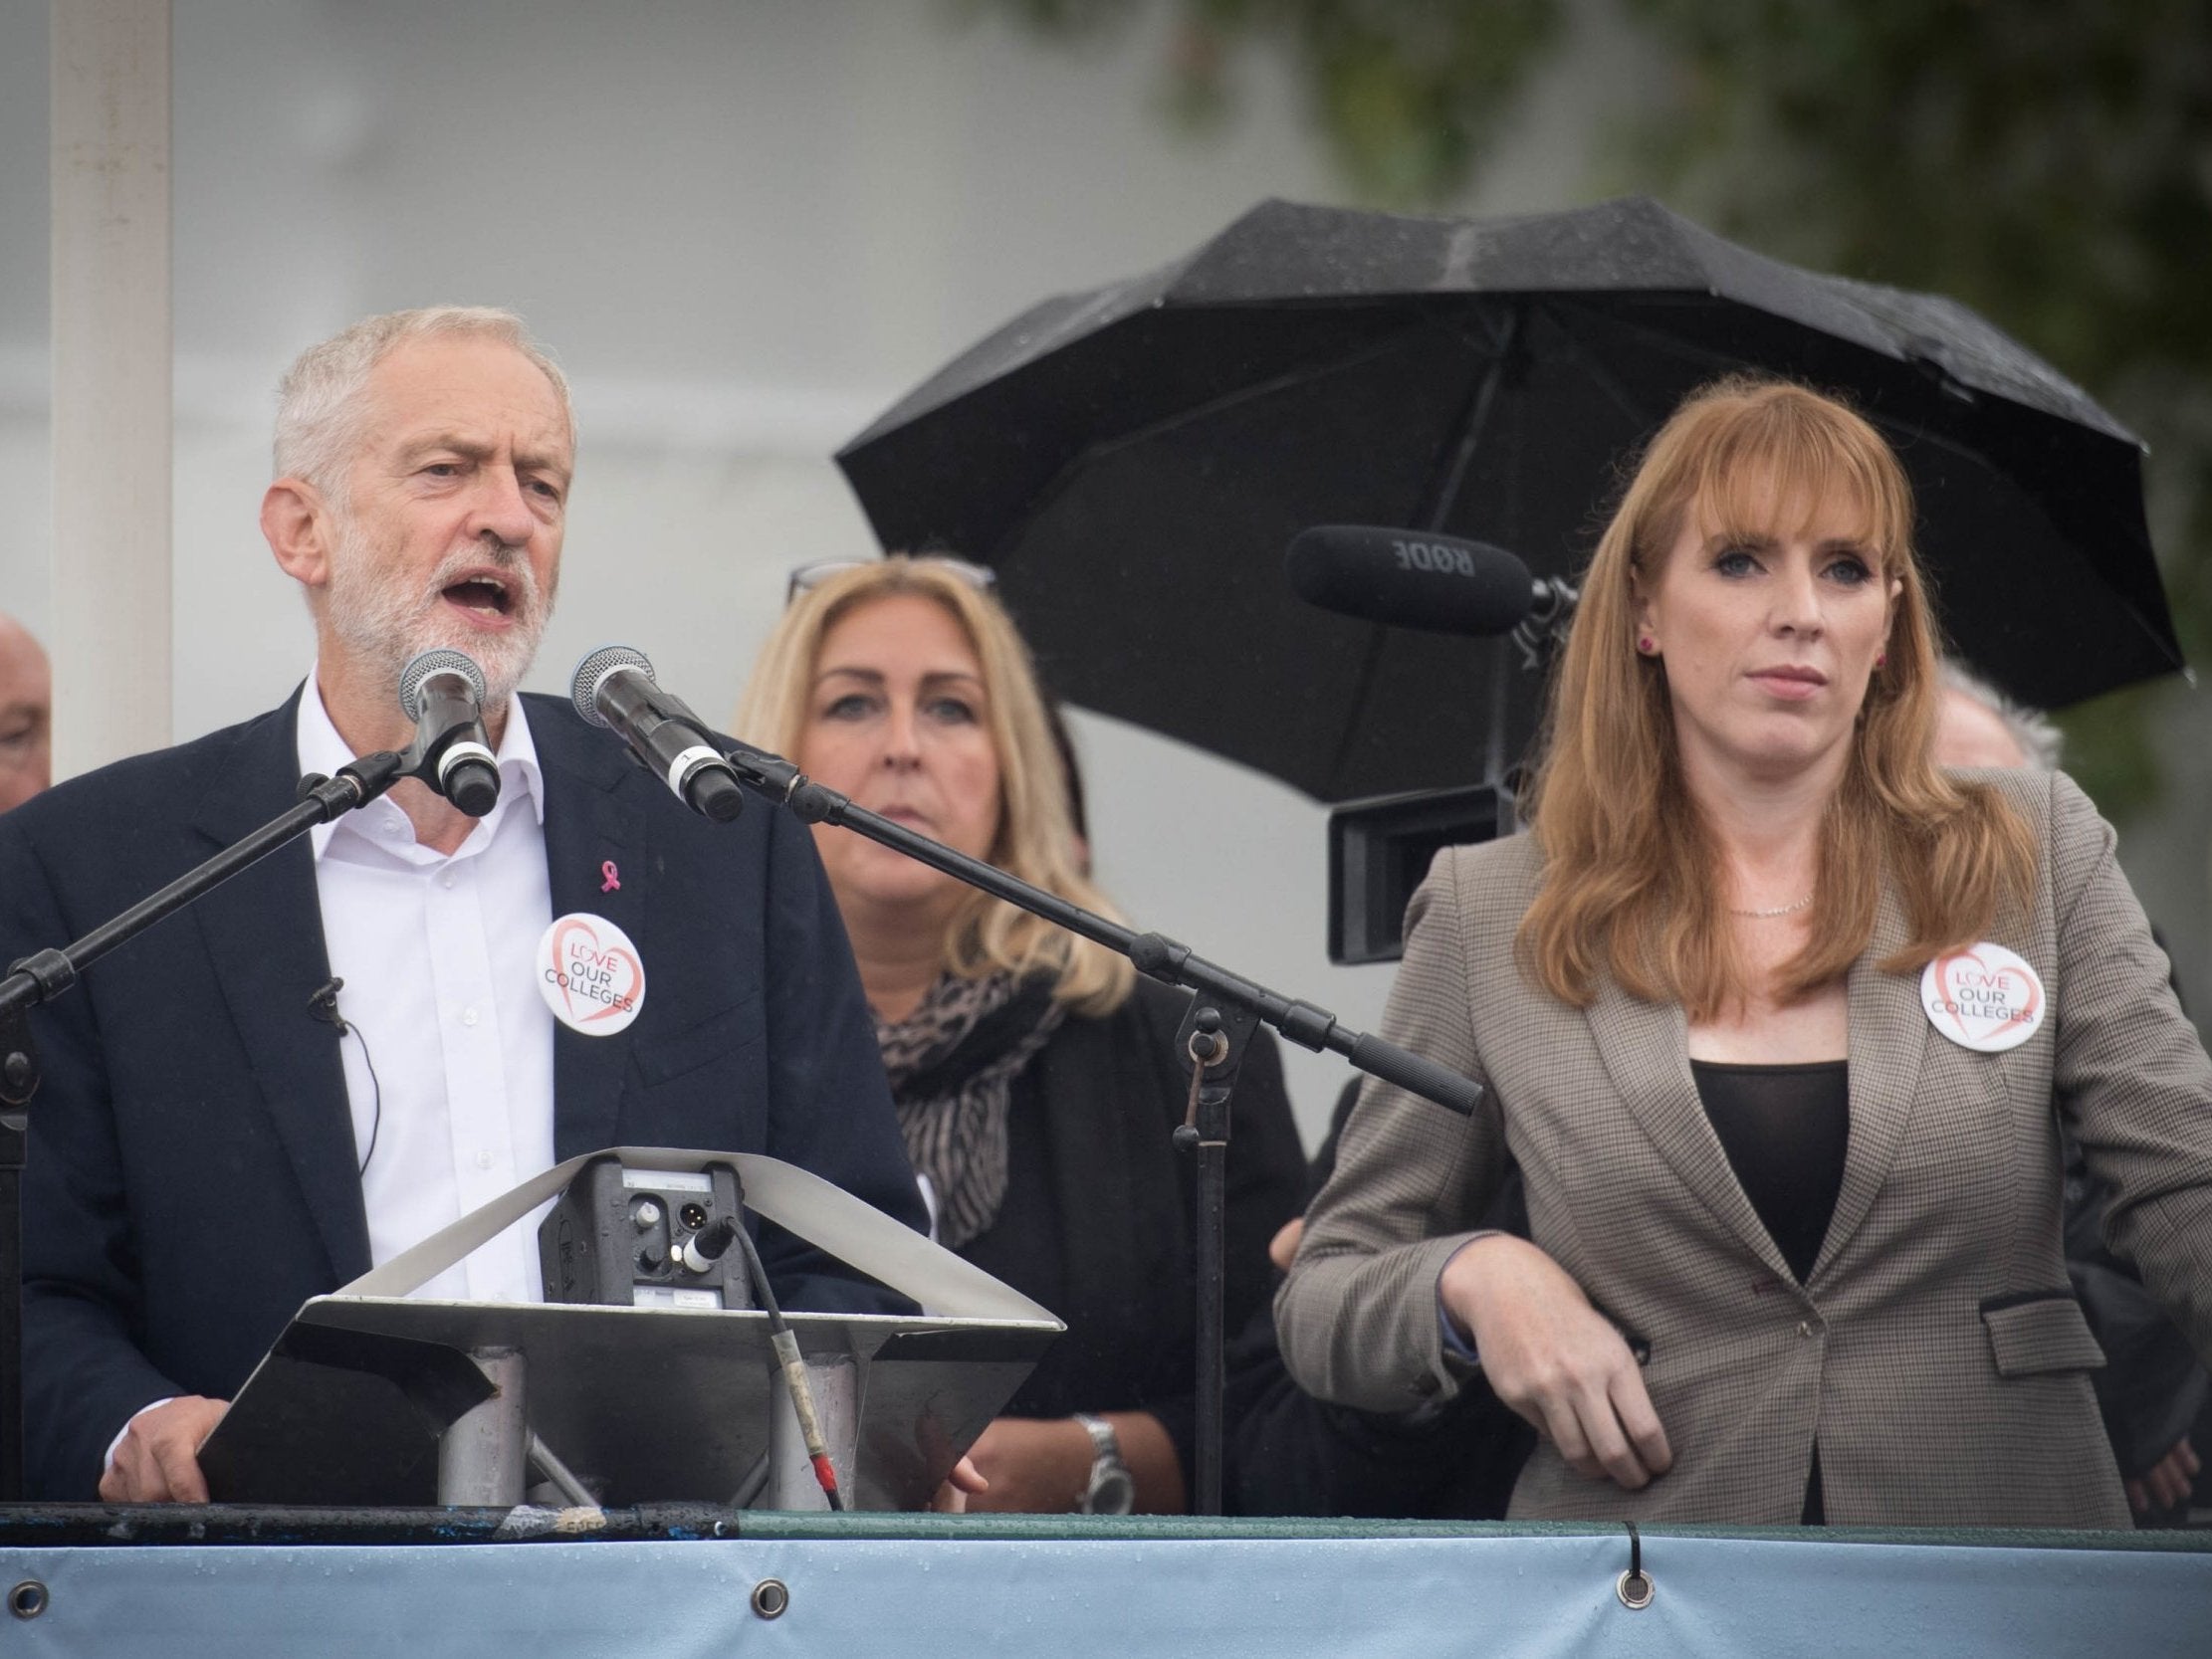 Government&apos;s treatment of college staff is &apos;disgraceful&apos;, Jeremy Corbyn tells protest